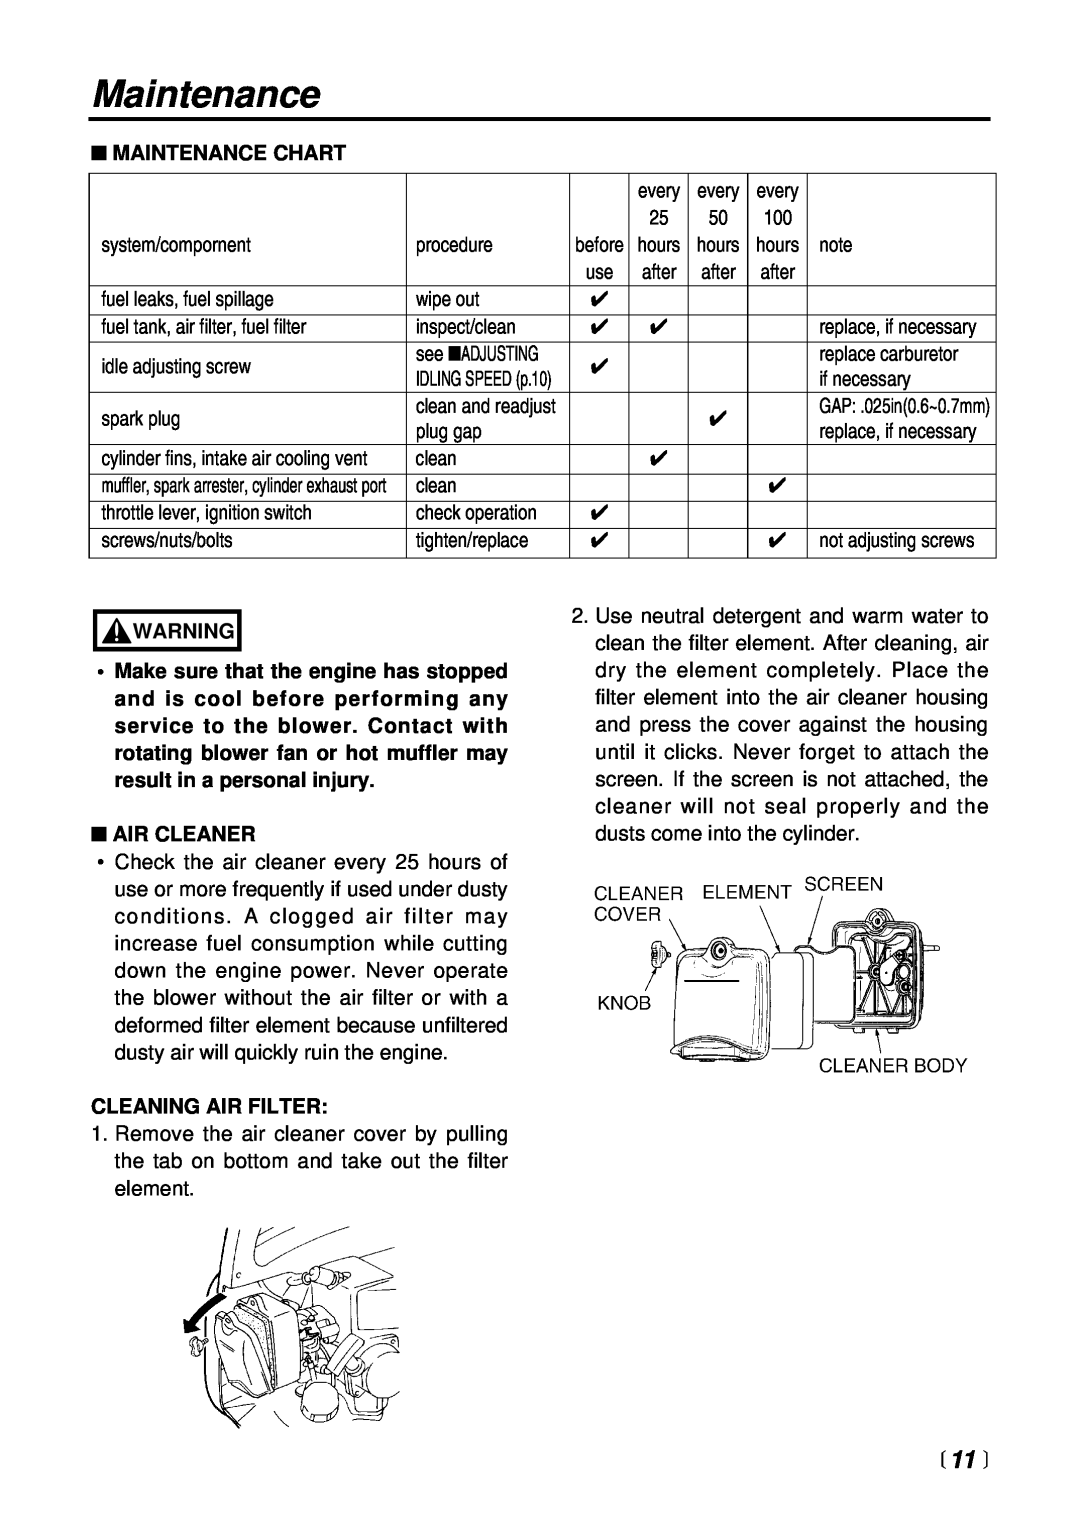 RedMax HBZ2600 manual 11 , Maintenance Chart, Air Cleaner, Cleaning Air Filter 